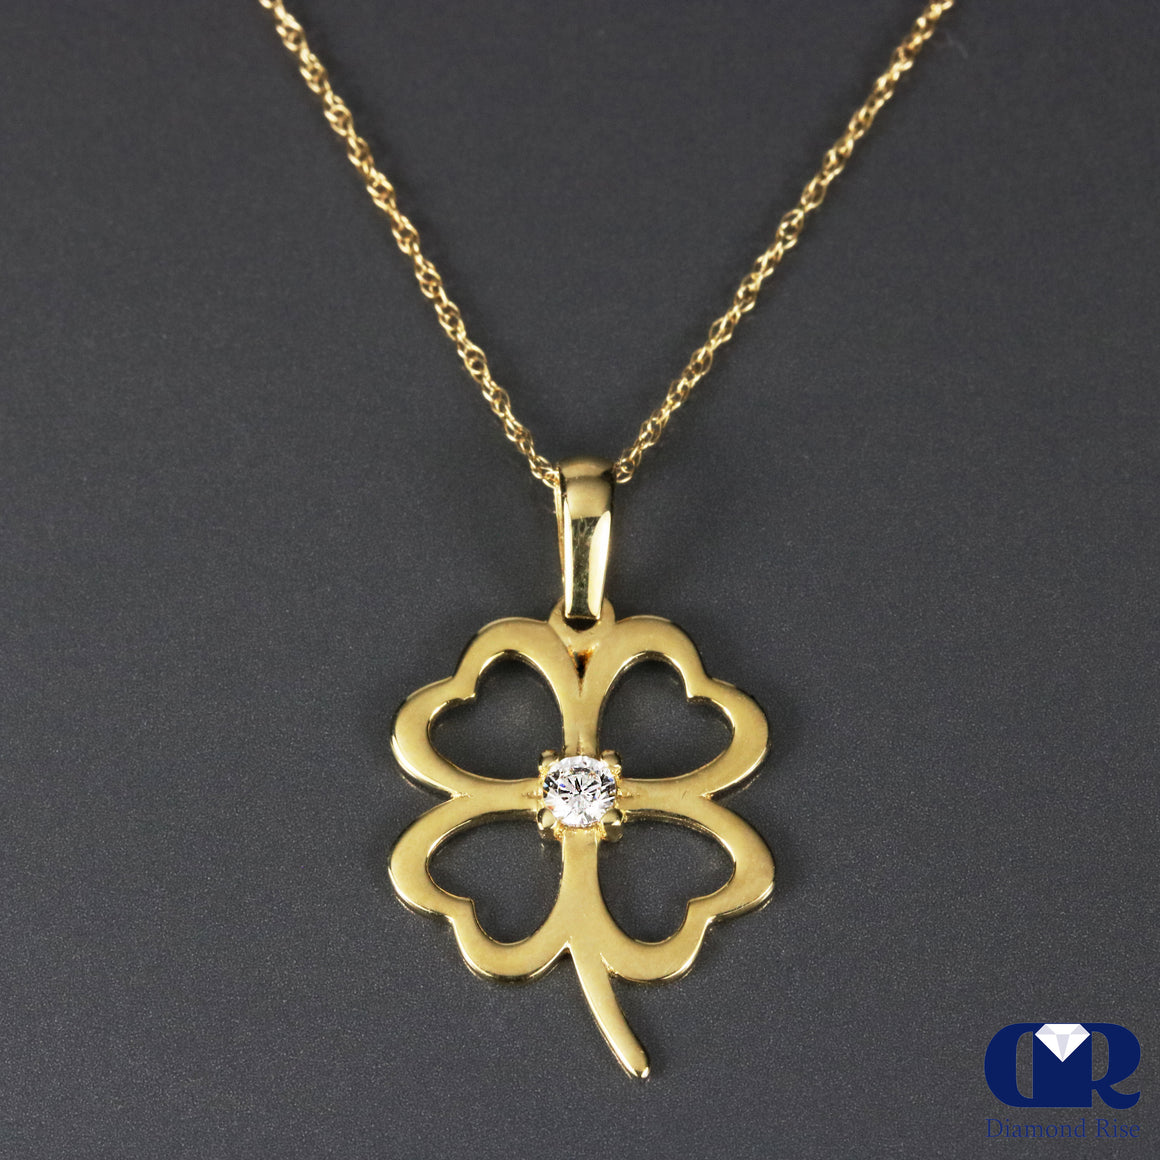 Diamond 14K Gold Floral Charm Pendant Necklace With 16" Chain